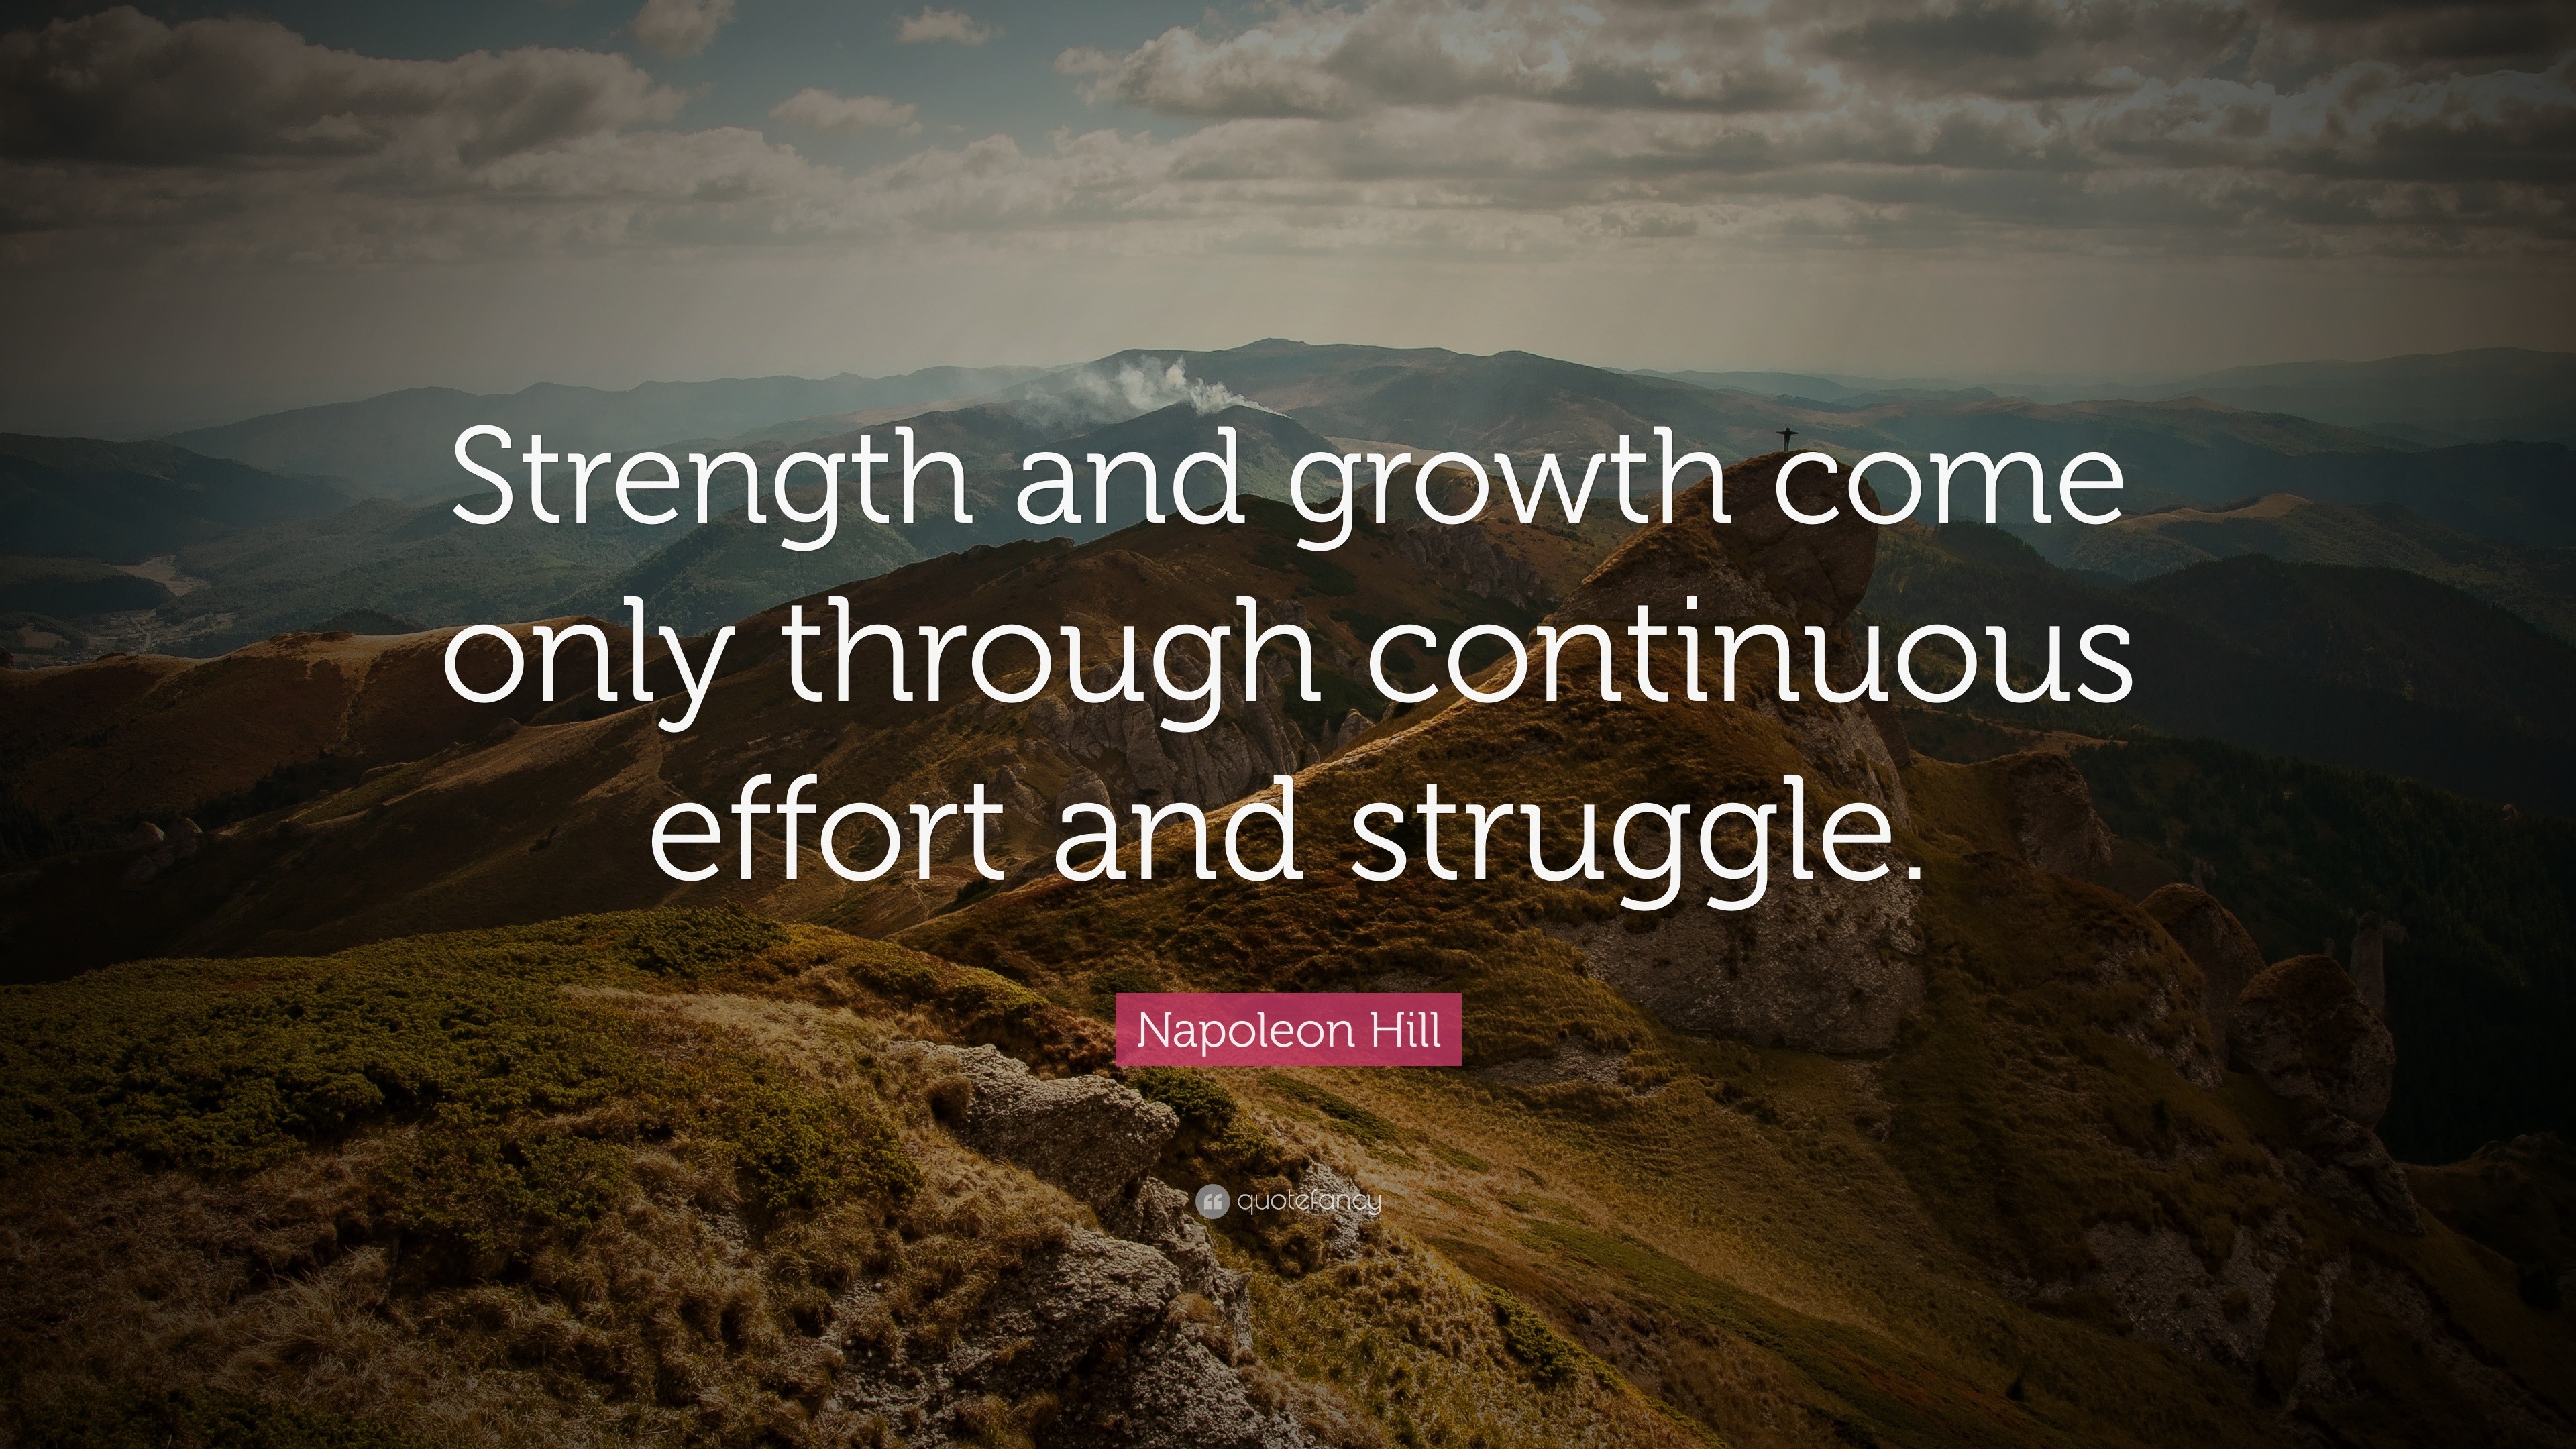 20381 Napoleon Hill Quote Strength and growth come only through